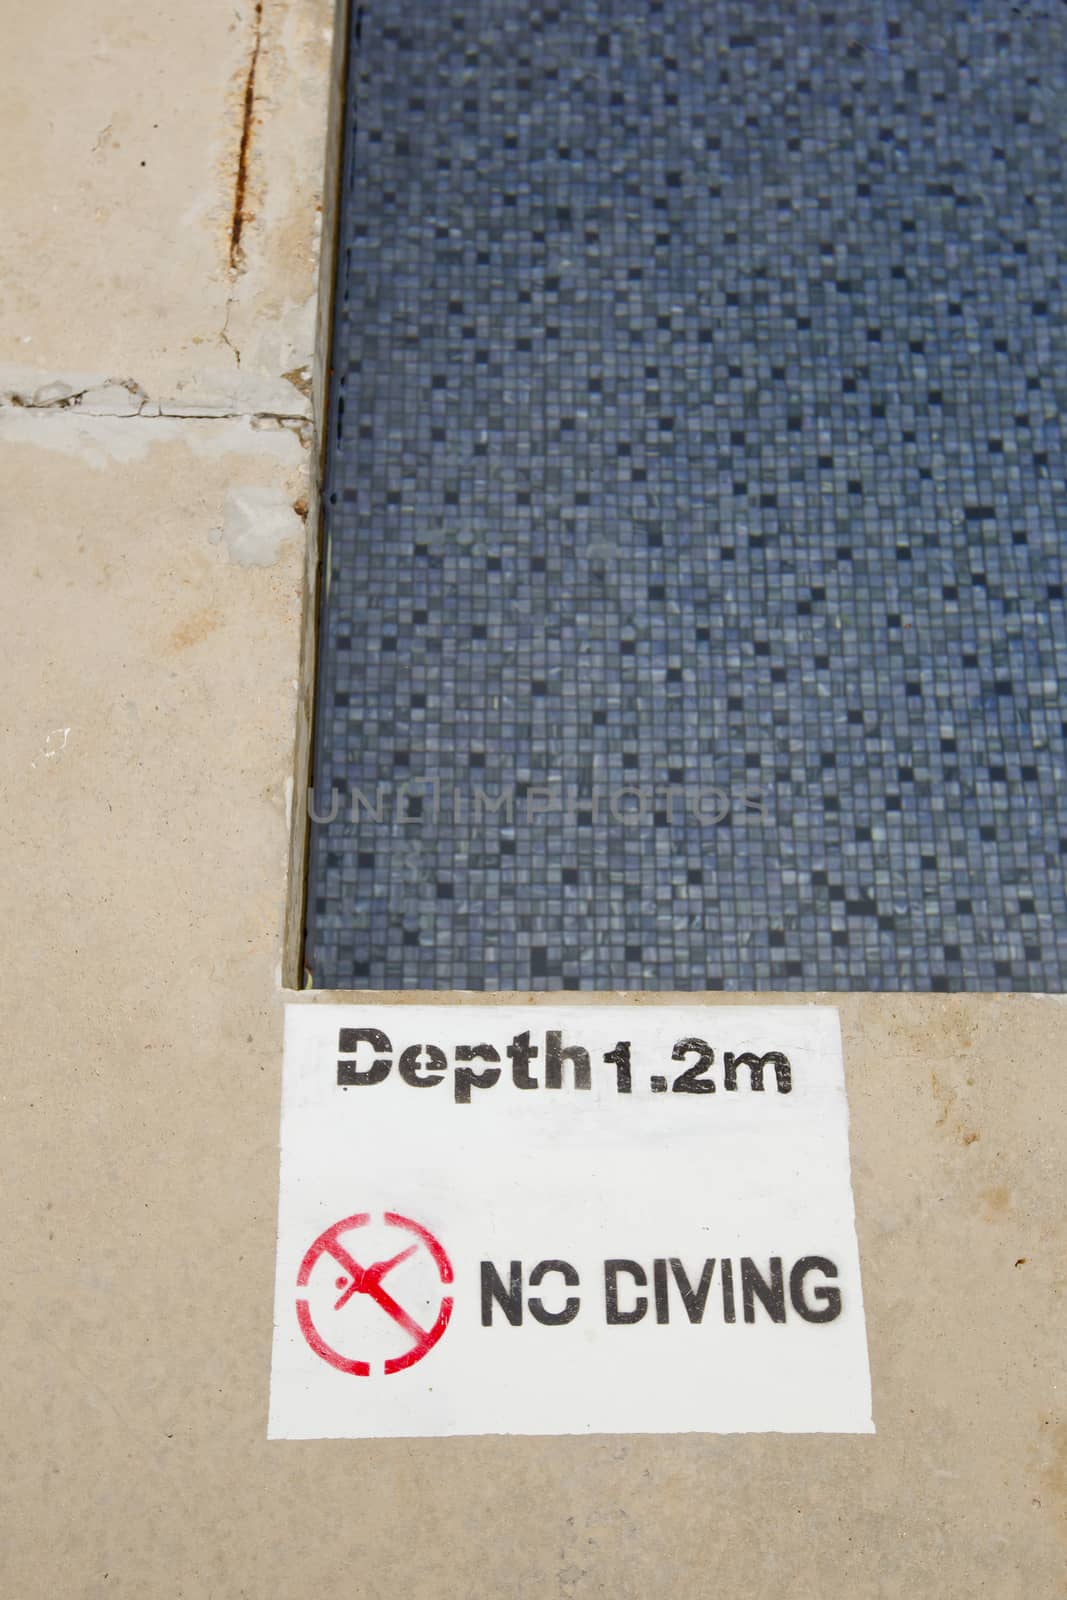 No diving and jumping sign by art9858